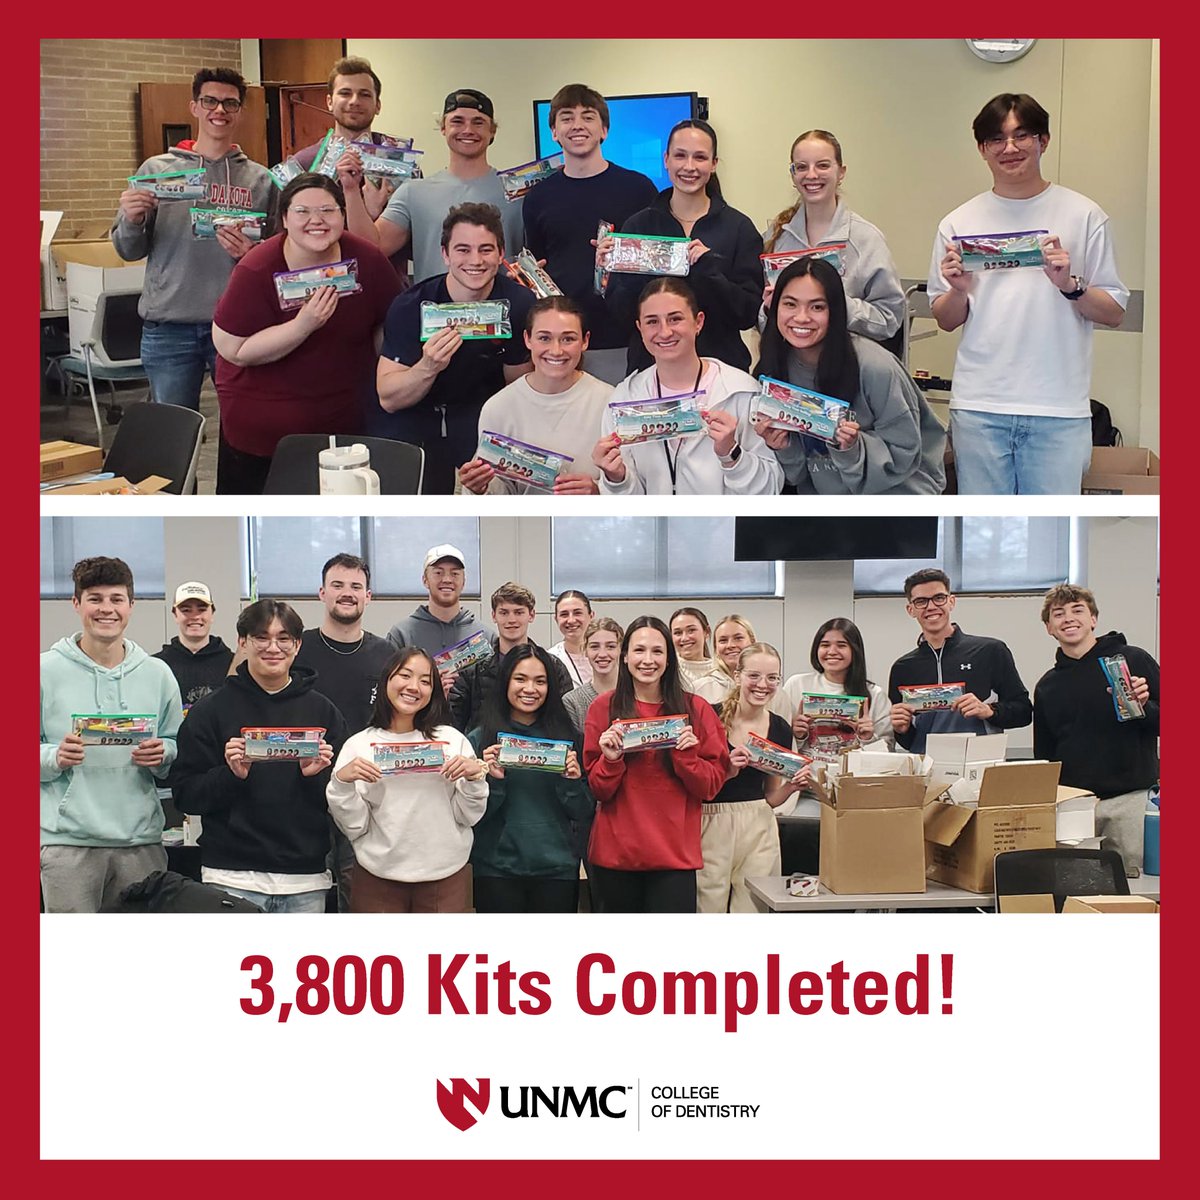 Congrats to the volunteers who packed Early Dental Health Starter Kits on March 22 & April 5; you completed an amazing 3,800 kits! The kits are filled with oral hygiene items and are distributed to parents throughout Nebraska to help prevent dental disease in children. #iamunmc